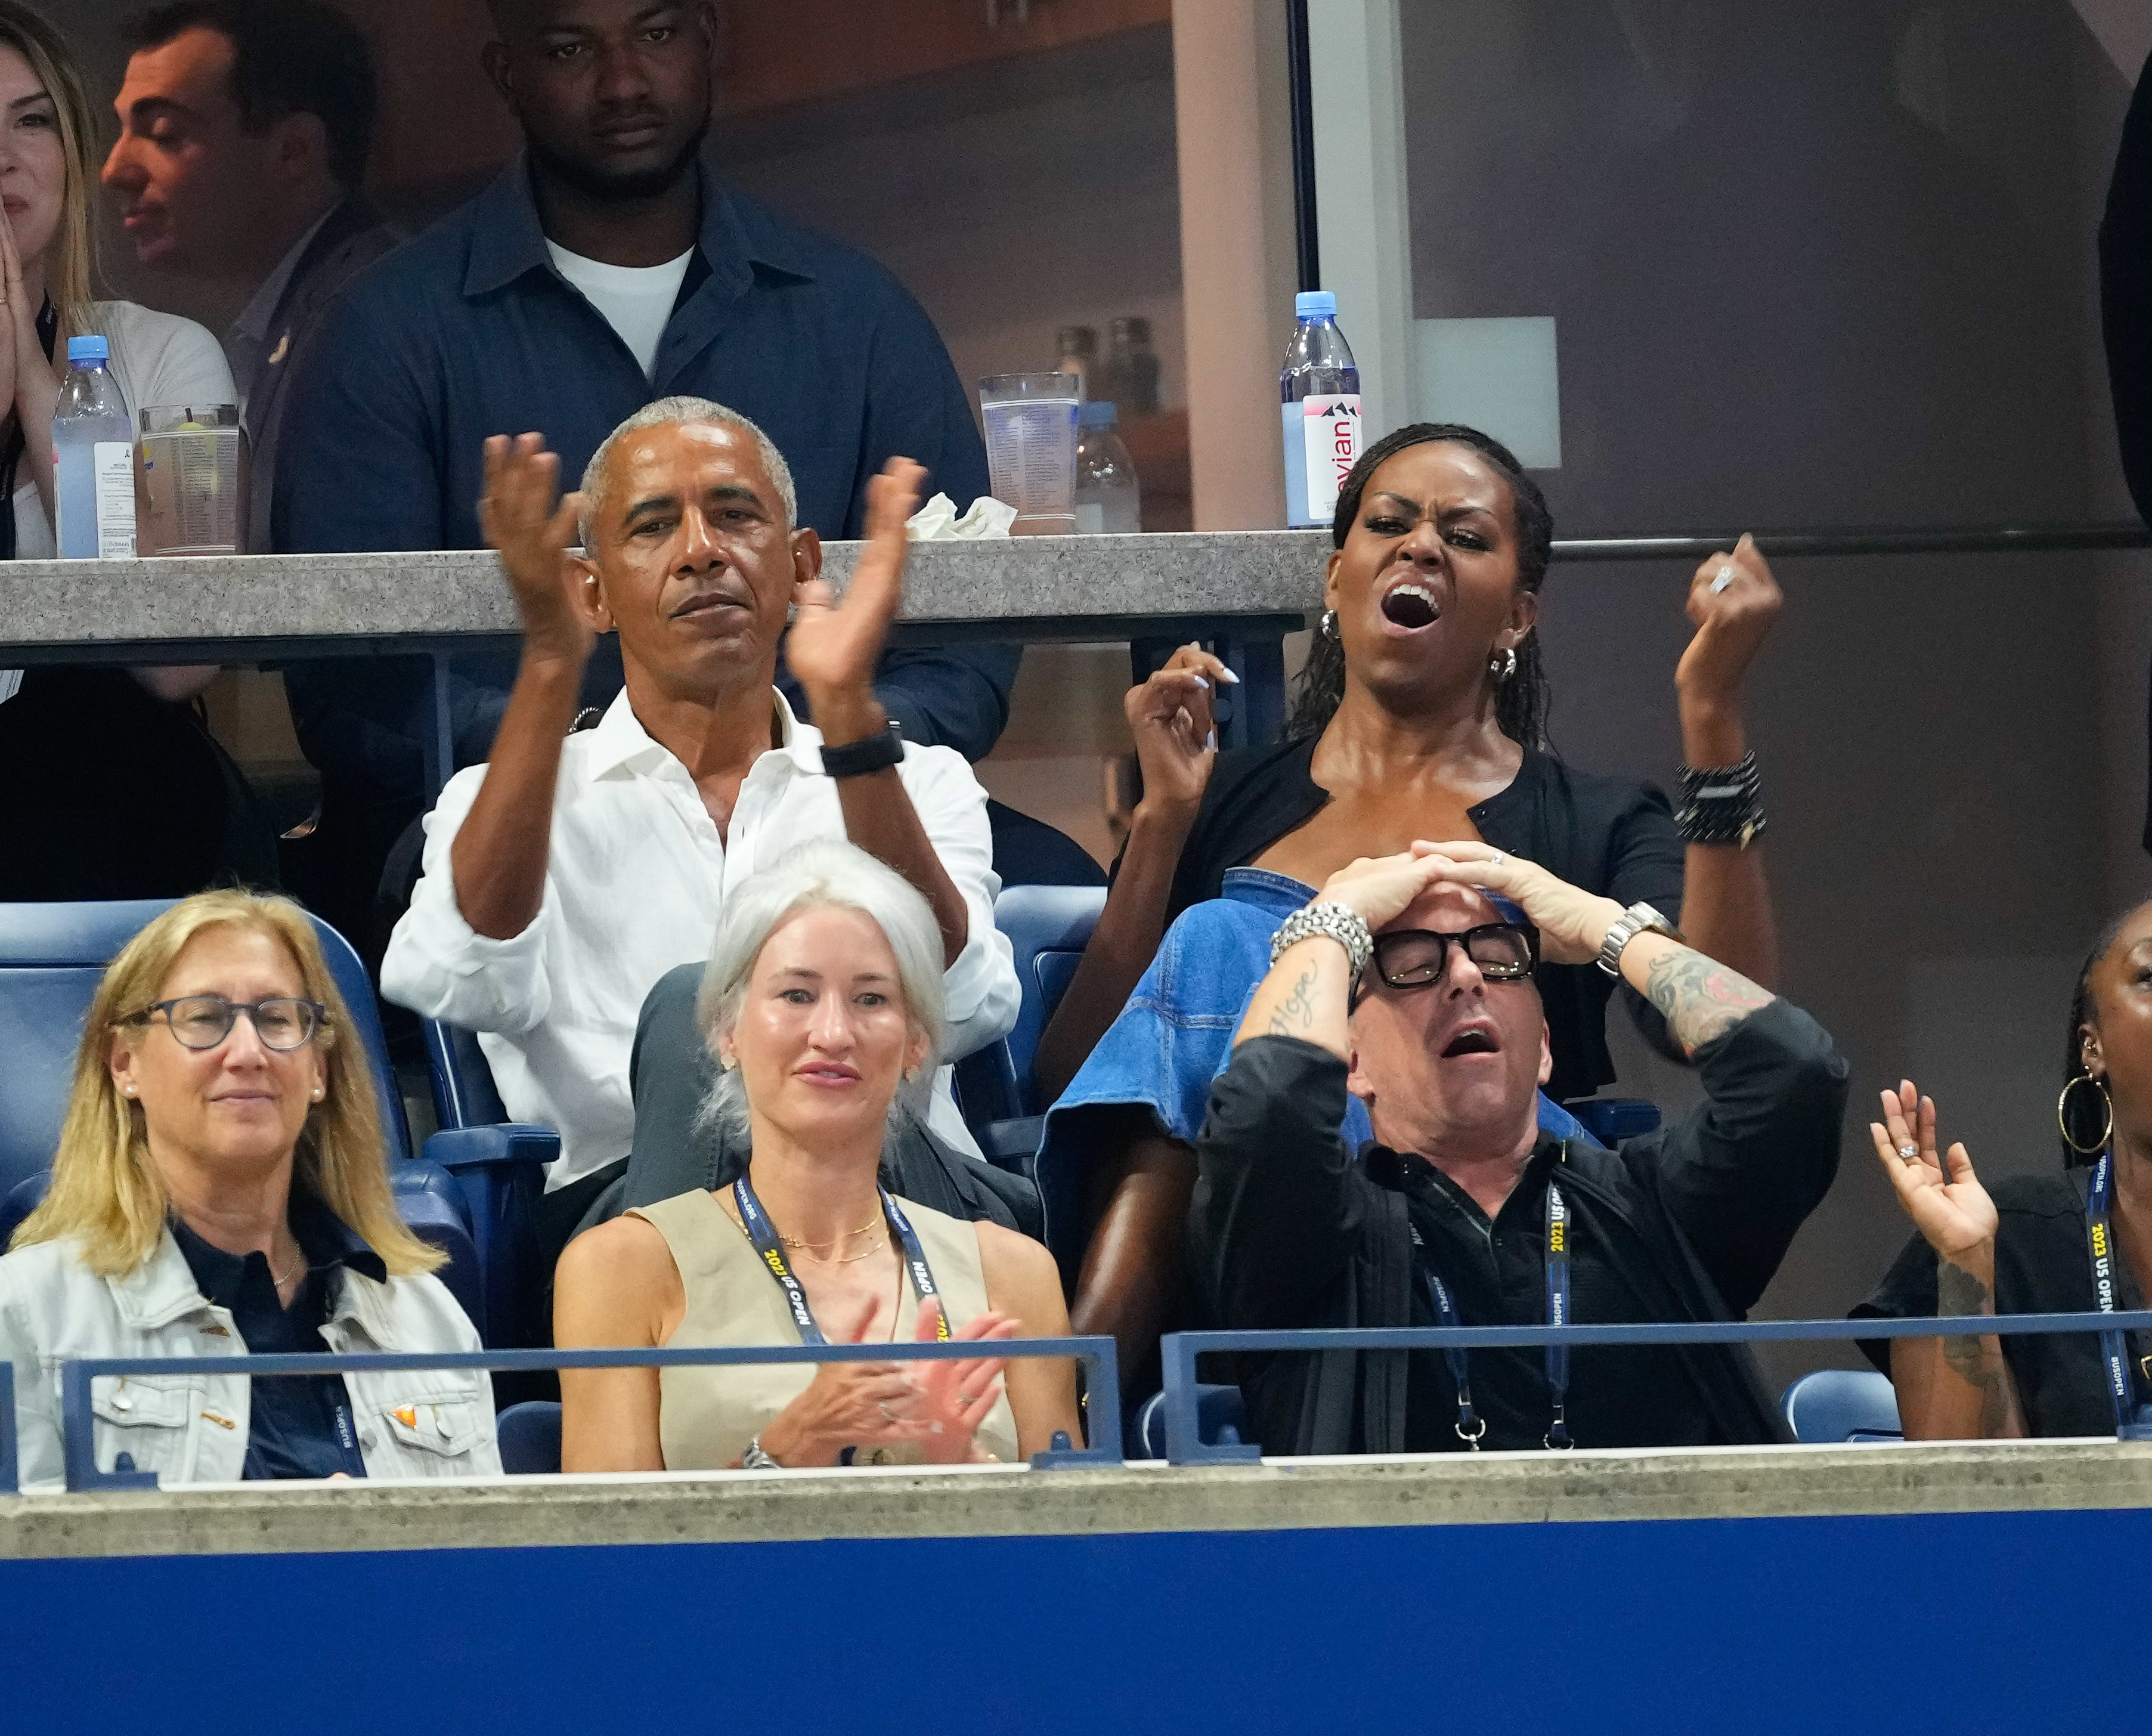 Barack and Michelle Obama cheering in the stands